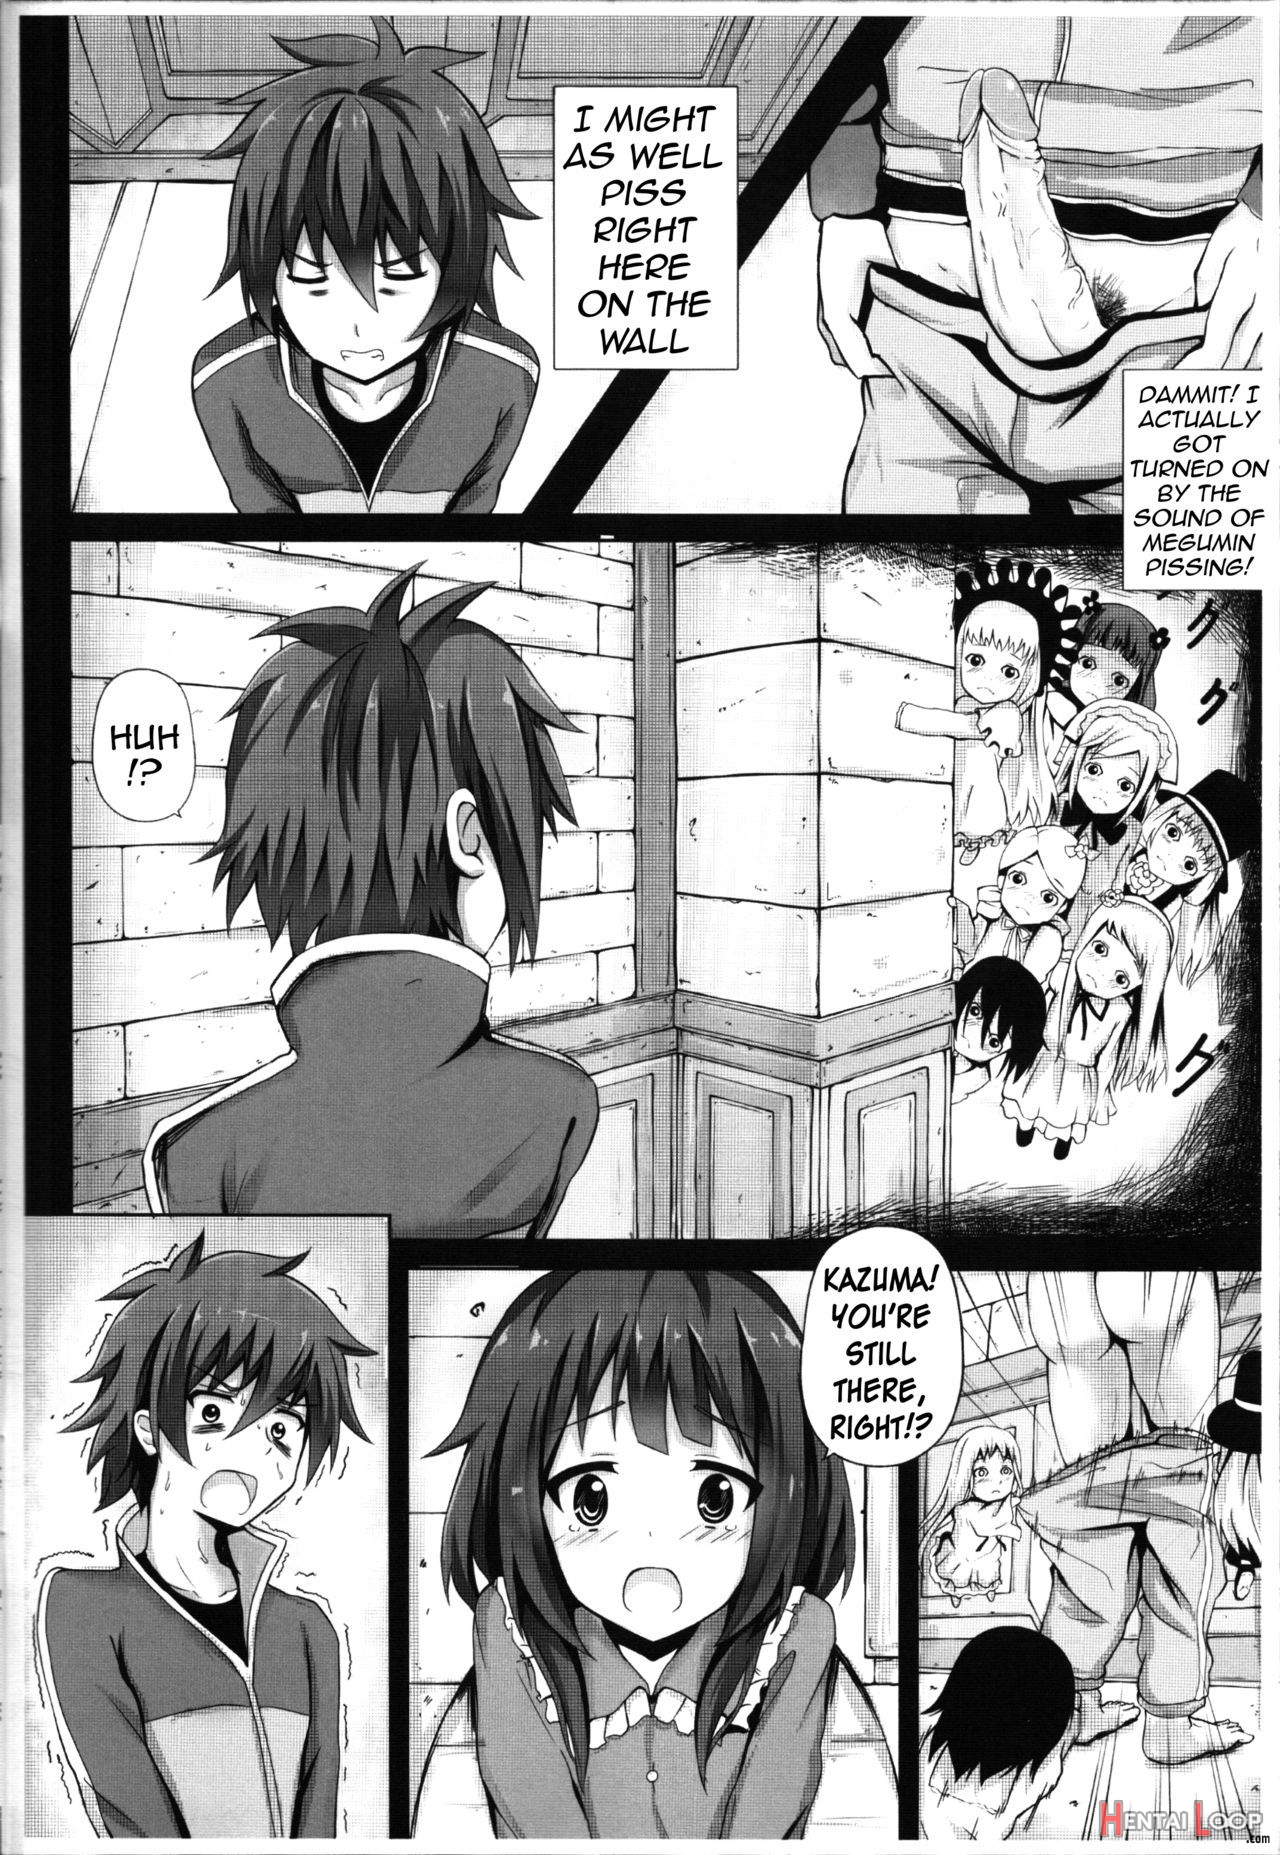 Giving â—‹â—‹ To Megumin In The Toilet! page 3